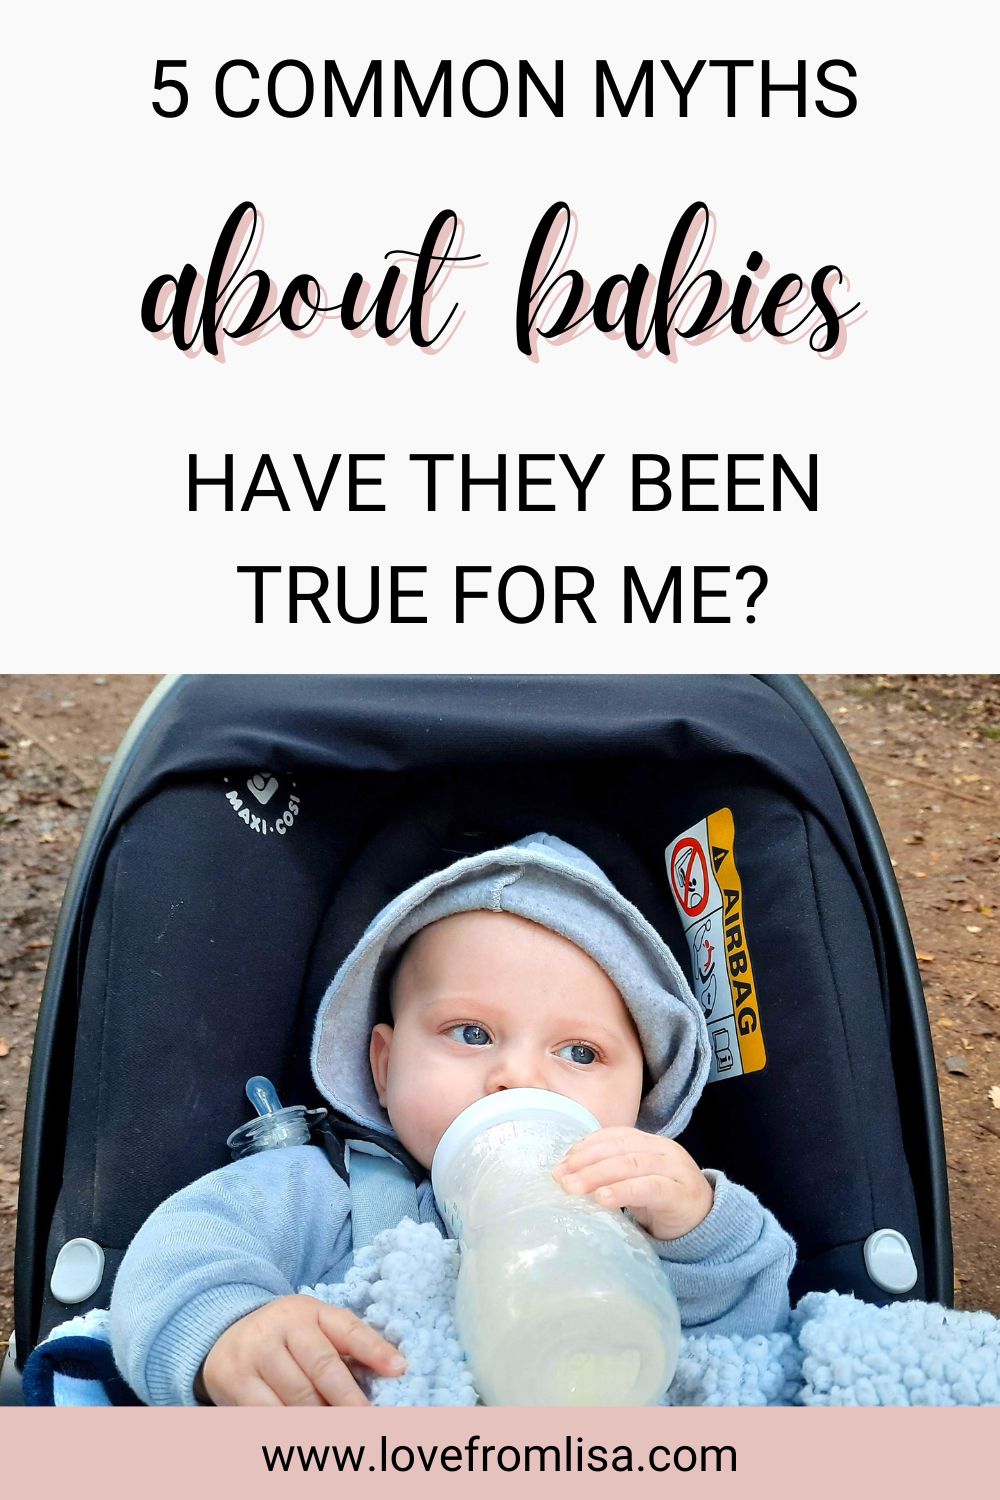 Common myths about babies can be given as advice, but sometimes the advice doesn’t work. Here are 5 common myths about babies, and if they worked for me.